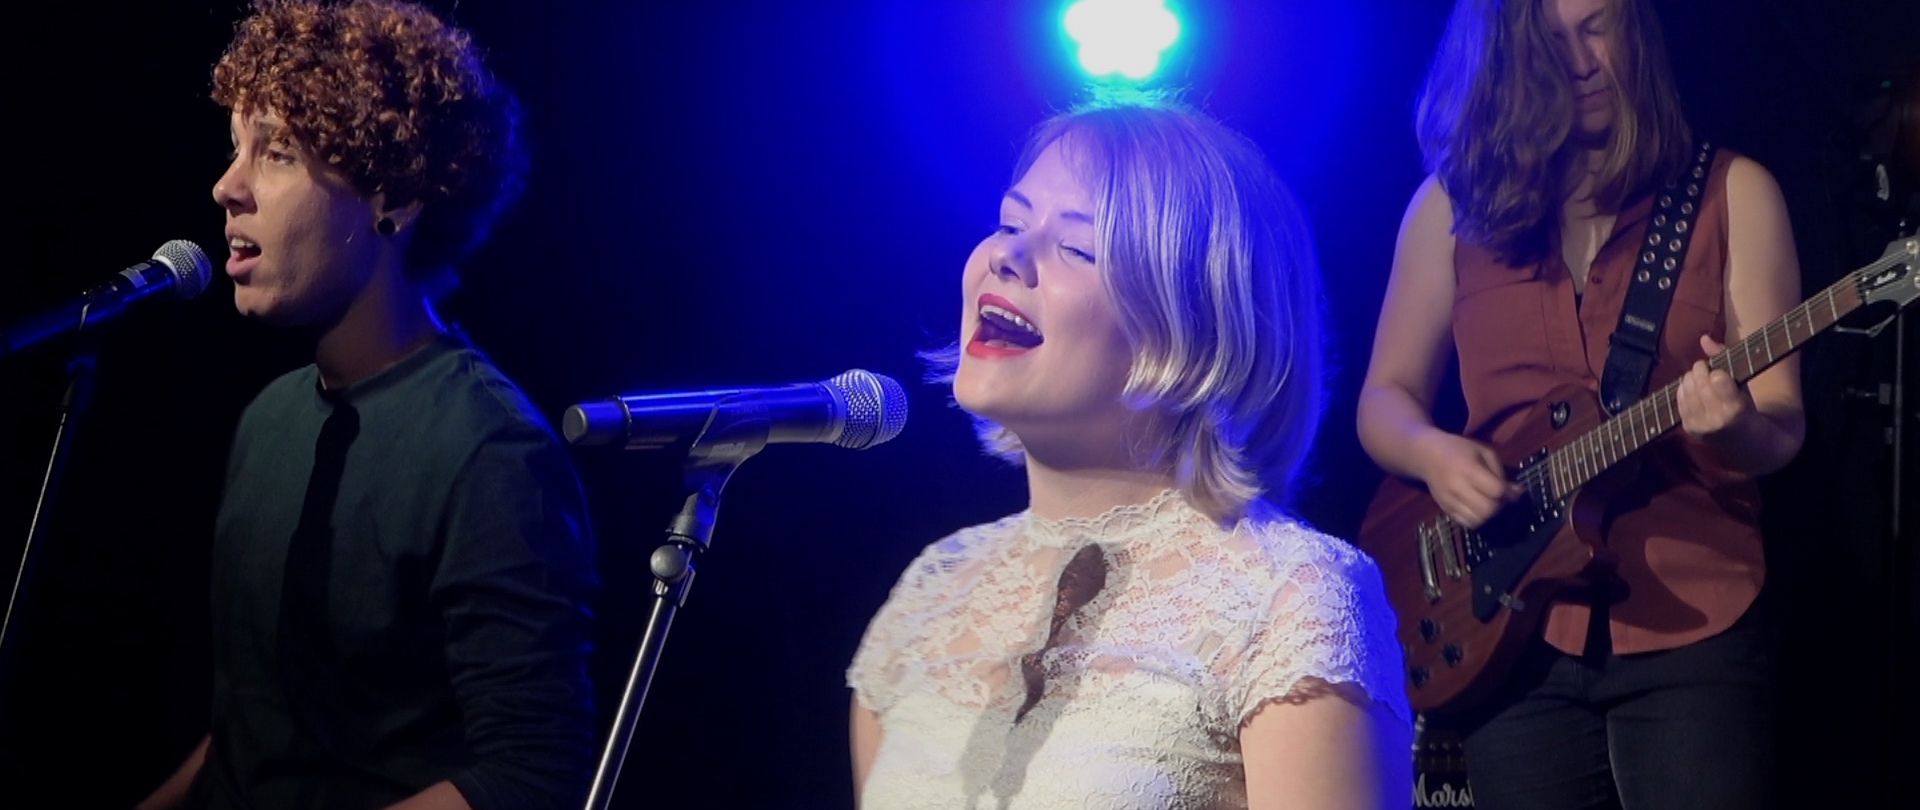 Still from Groei - Suzanne de Jong. Suzanne is standing in the middle of the frame in front of a microphone, singing. She has shoulder length blonde hair, wears a white lacy top and is wearing red lipstick. In the background is a back-up singer with short curly hair and a guitarist with long brown hair.